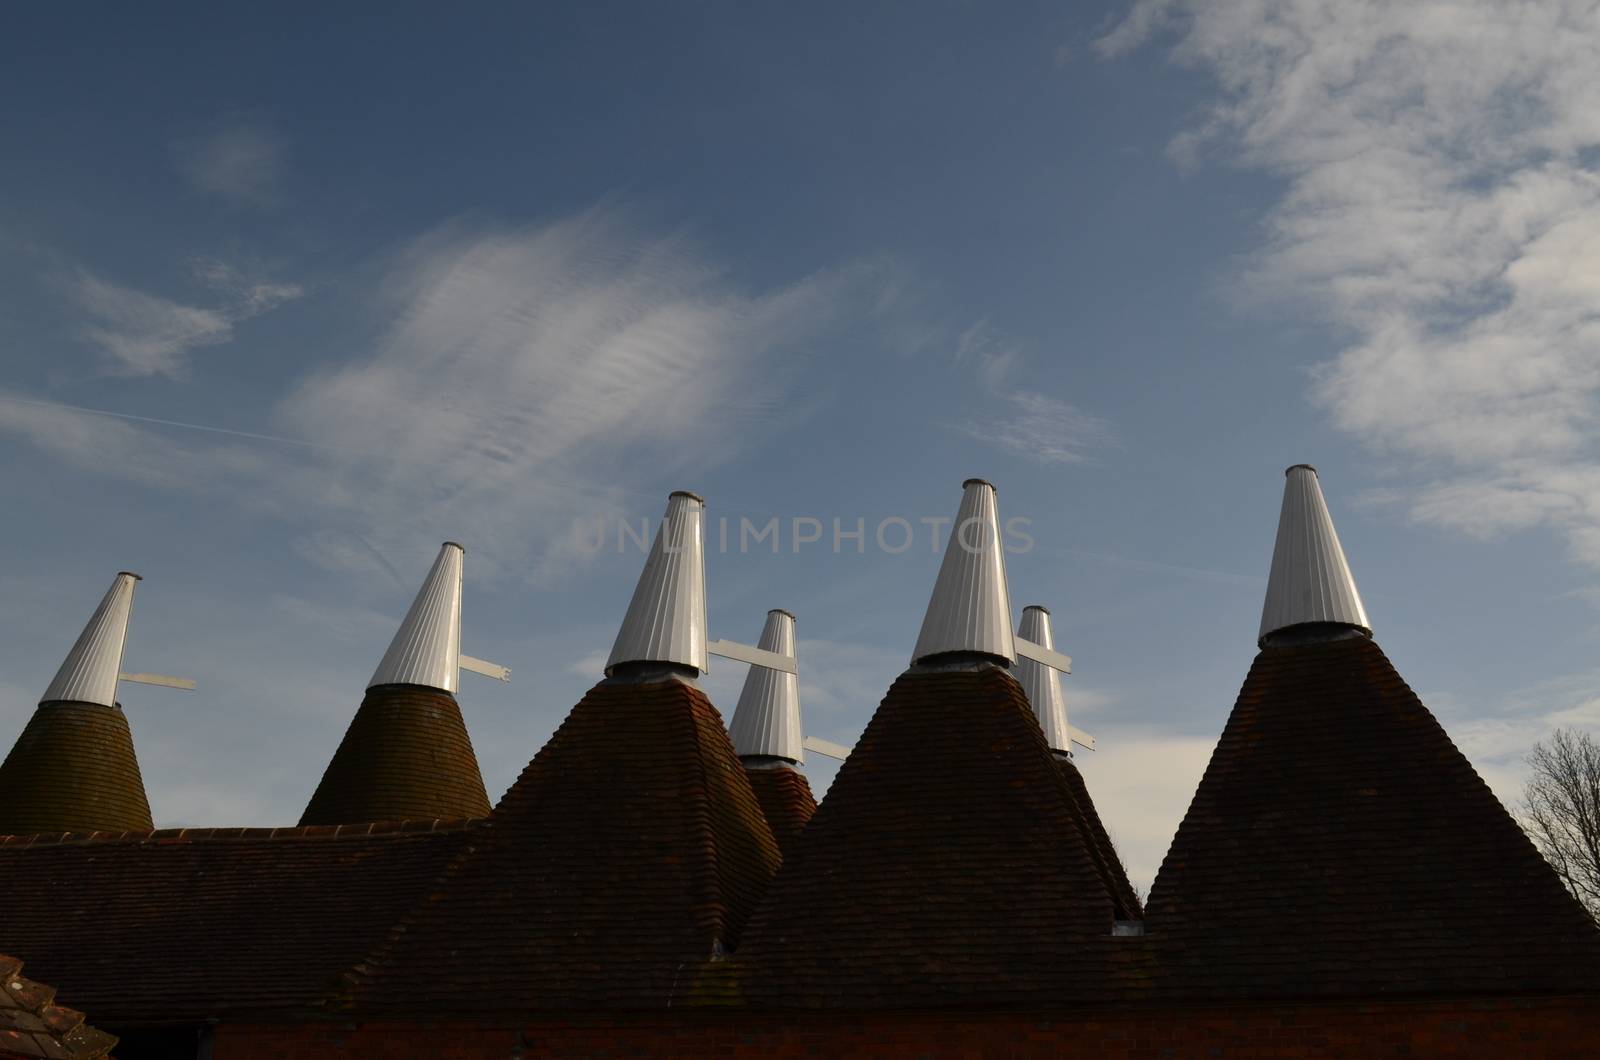 Traditional Kent Oast Houses which were used for the drying of hops before the beer brewing process could begin.